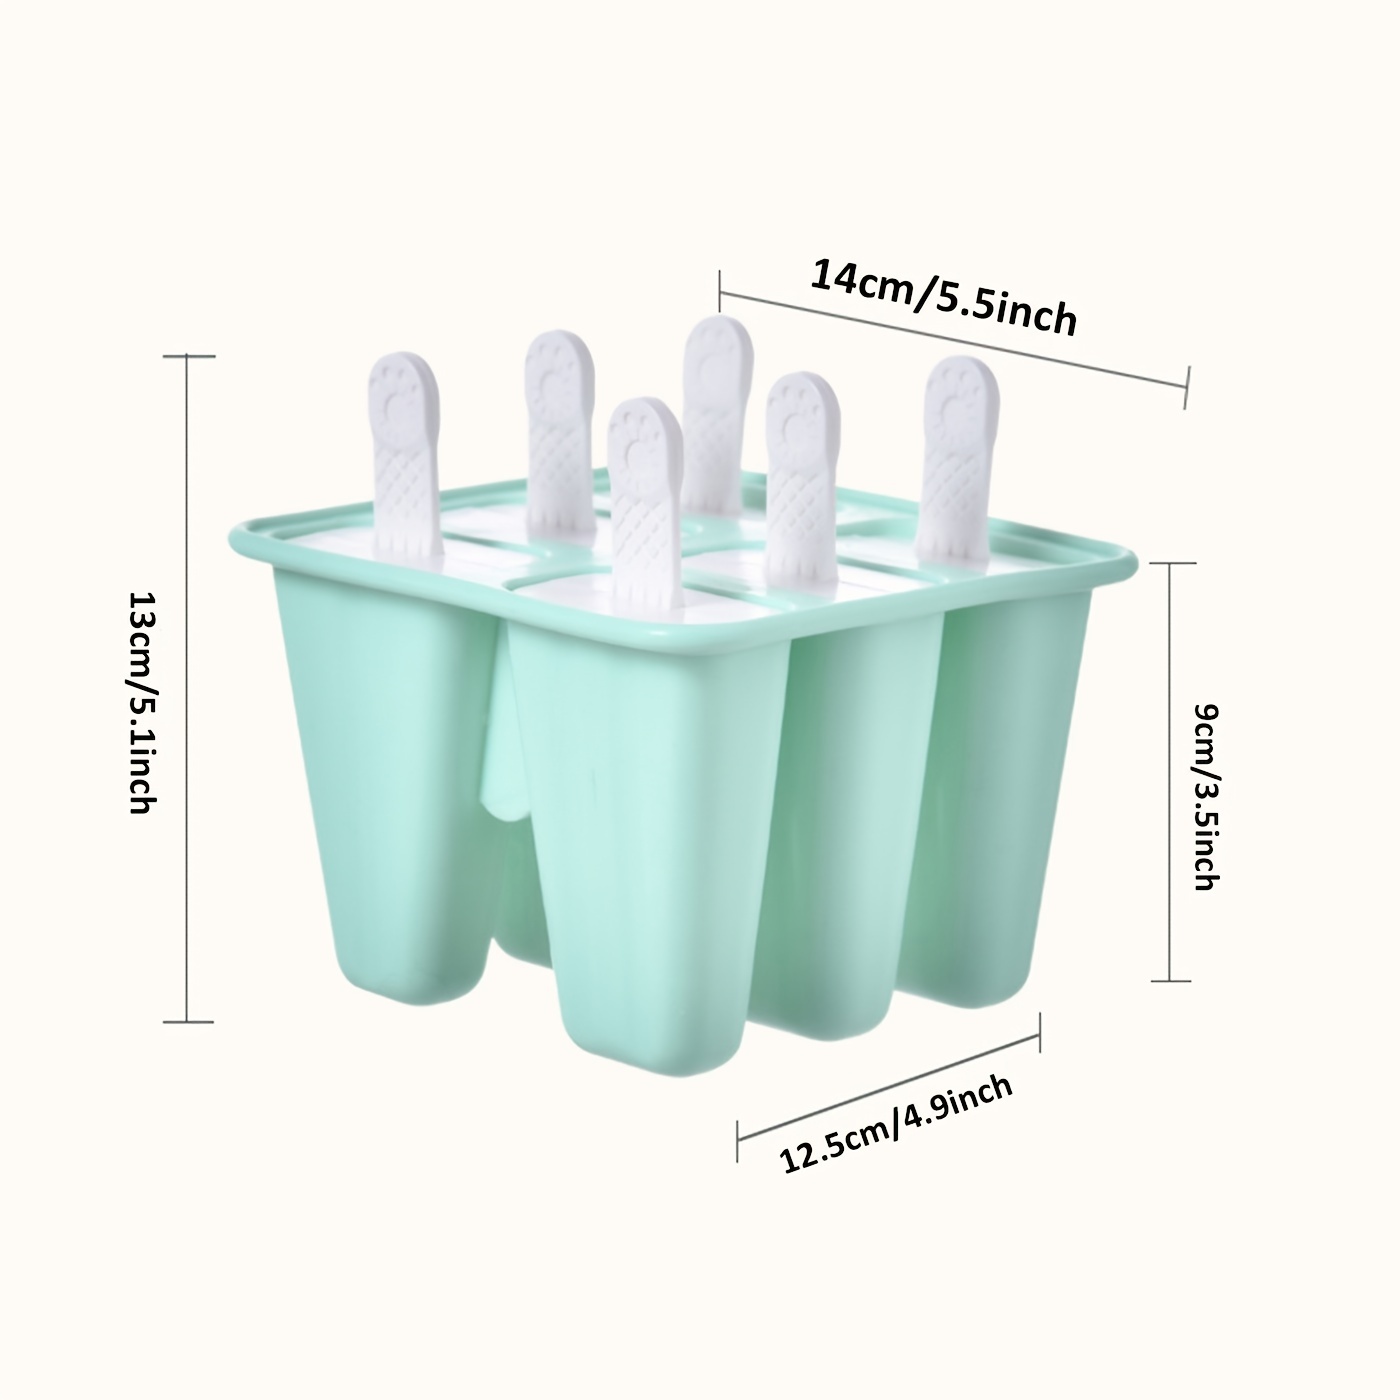 Popsicle Molds 6 Pieces Silicone Ice Pop Molds, BPA Free Popsicle